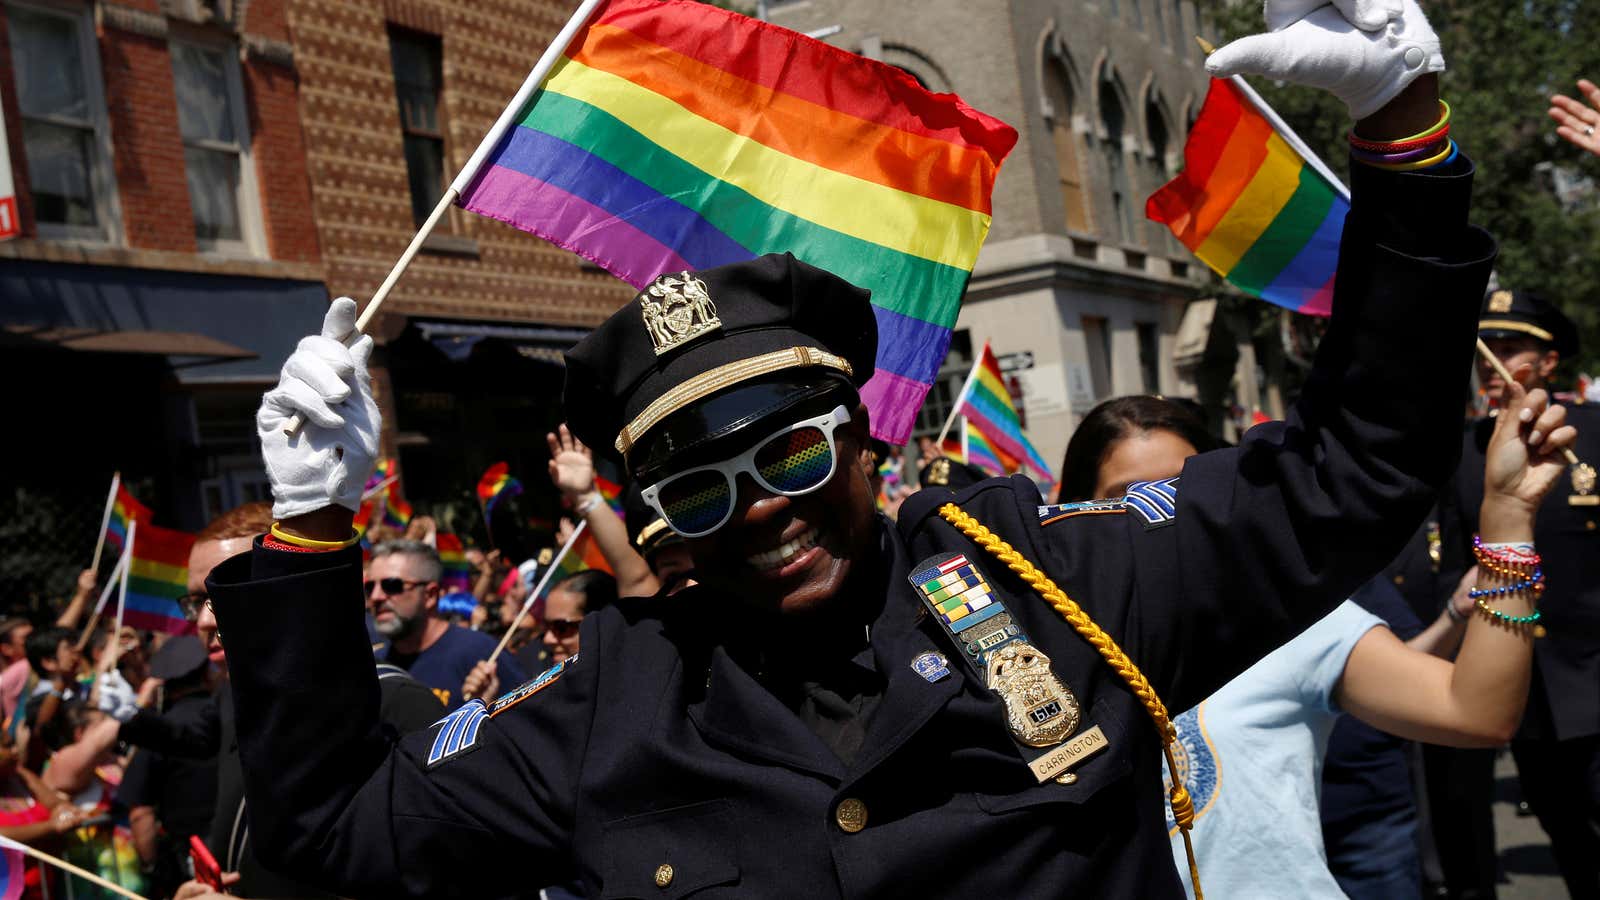 A New York City Police officer (NYPD) marches in the annual NYC Pride parade in New York City, New York, U.S., June 26, 2016.